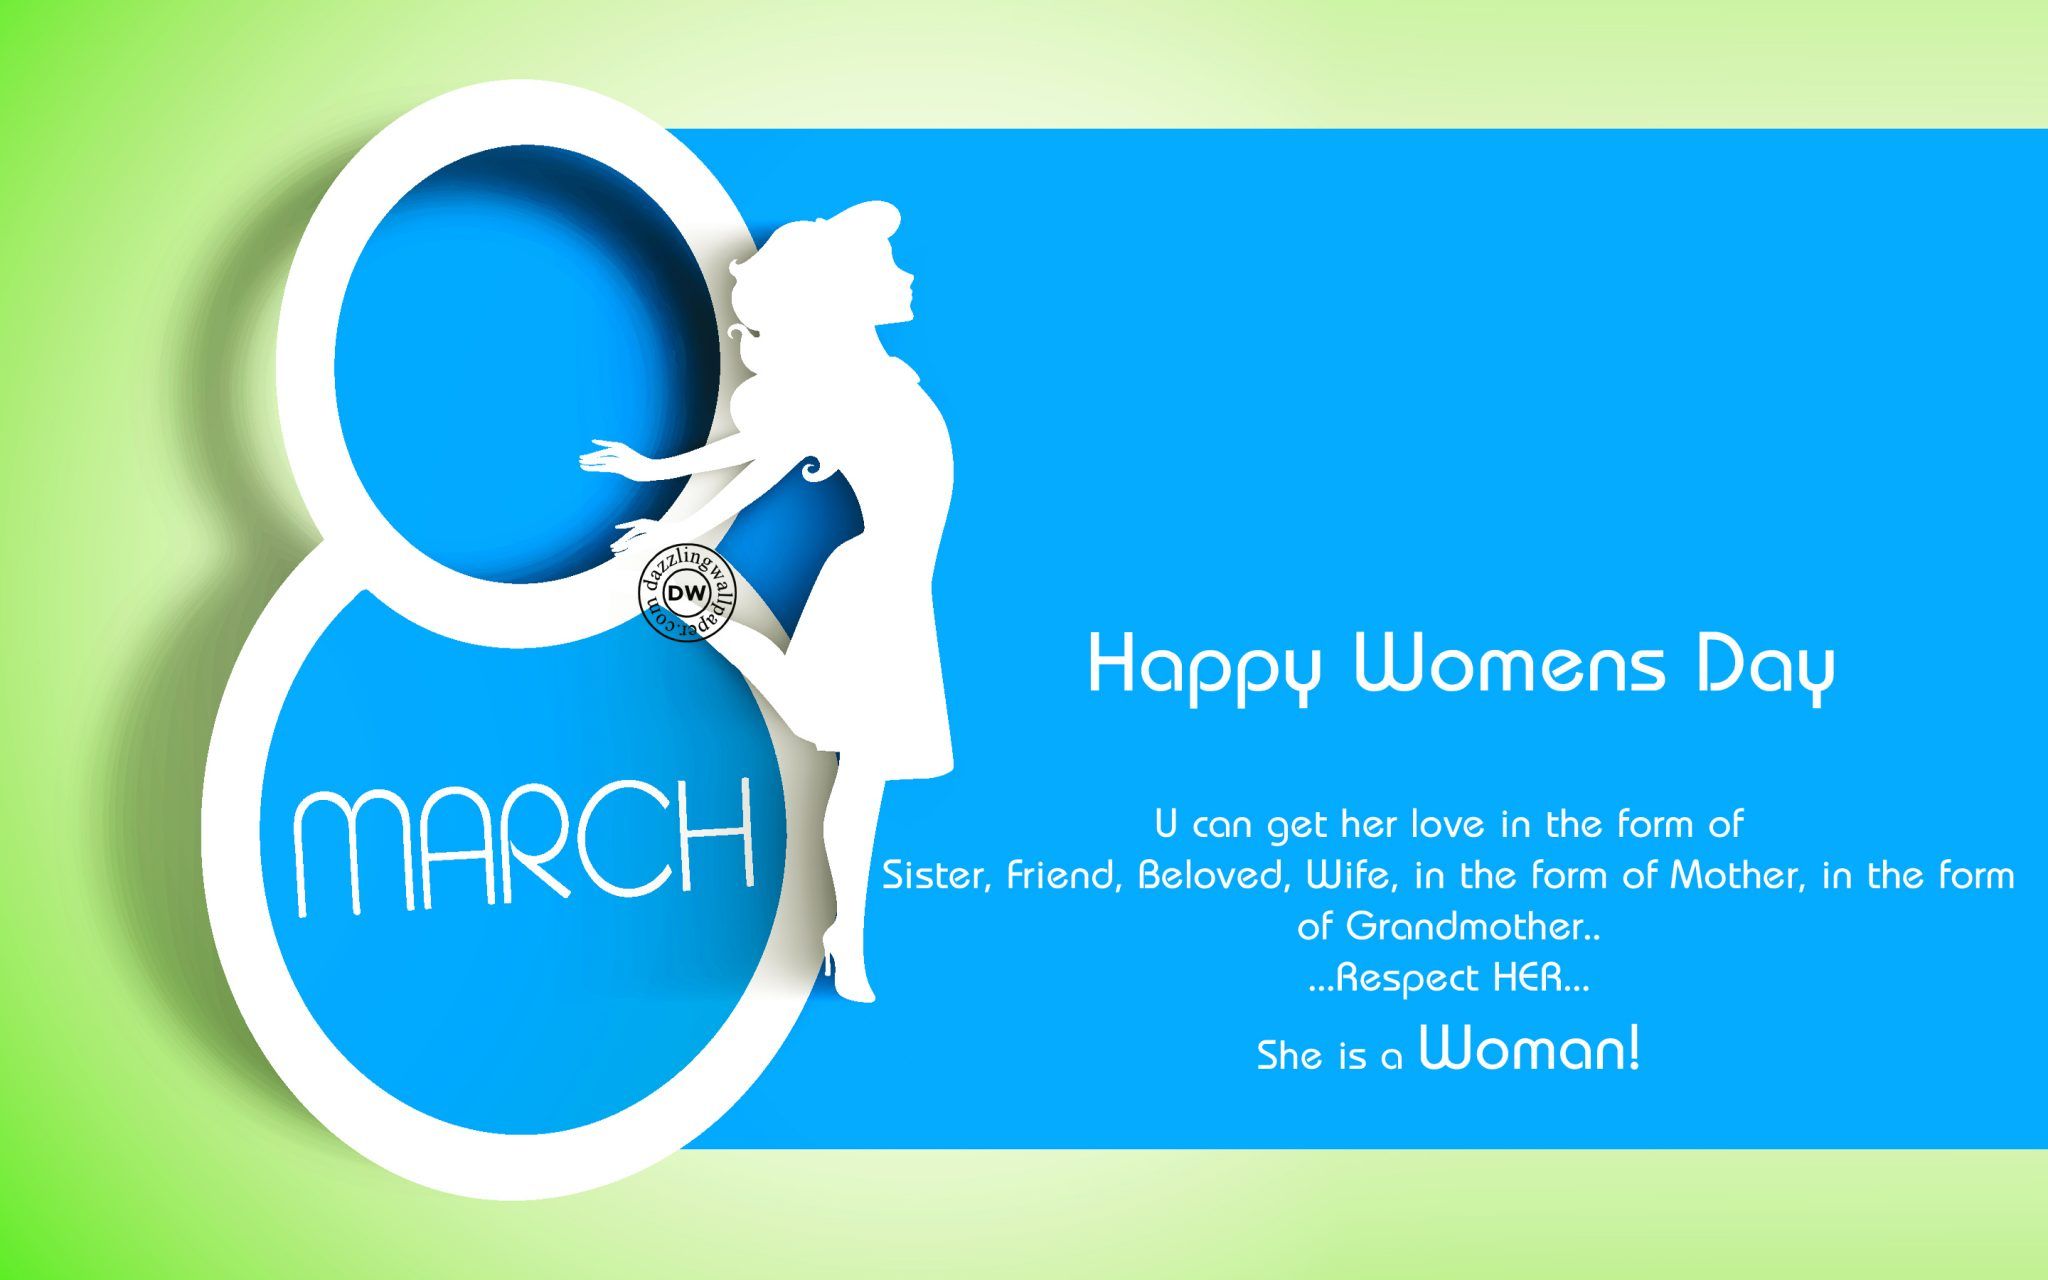 Women's Day 8th March